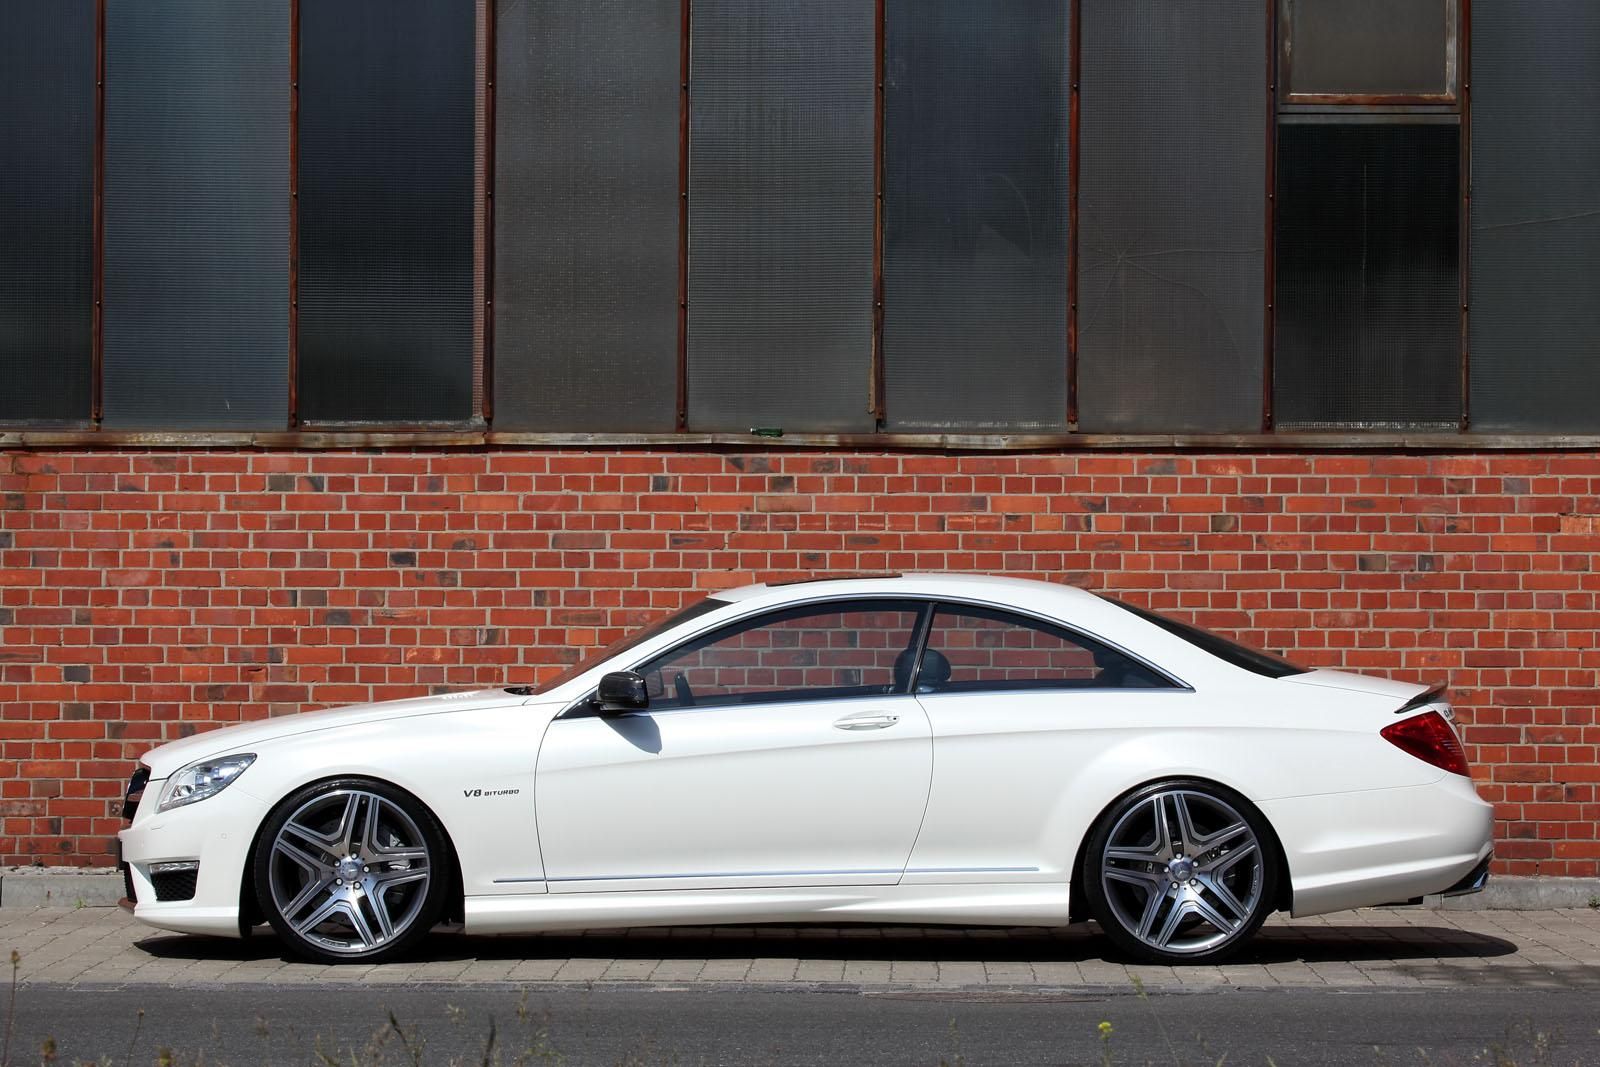 2013 Mercedes CL63 AMG by Unicate Germany